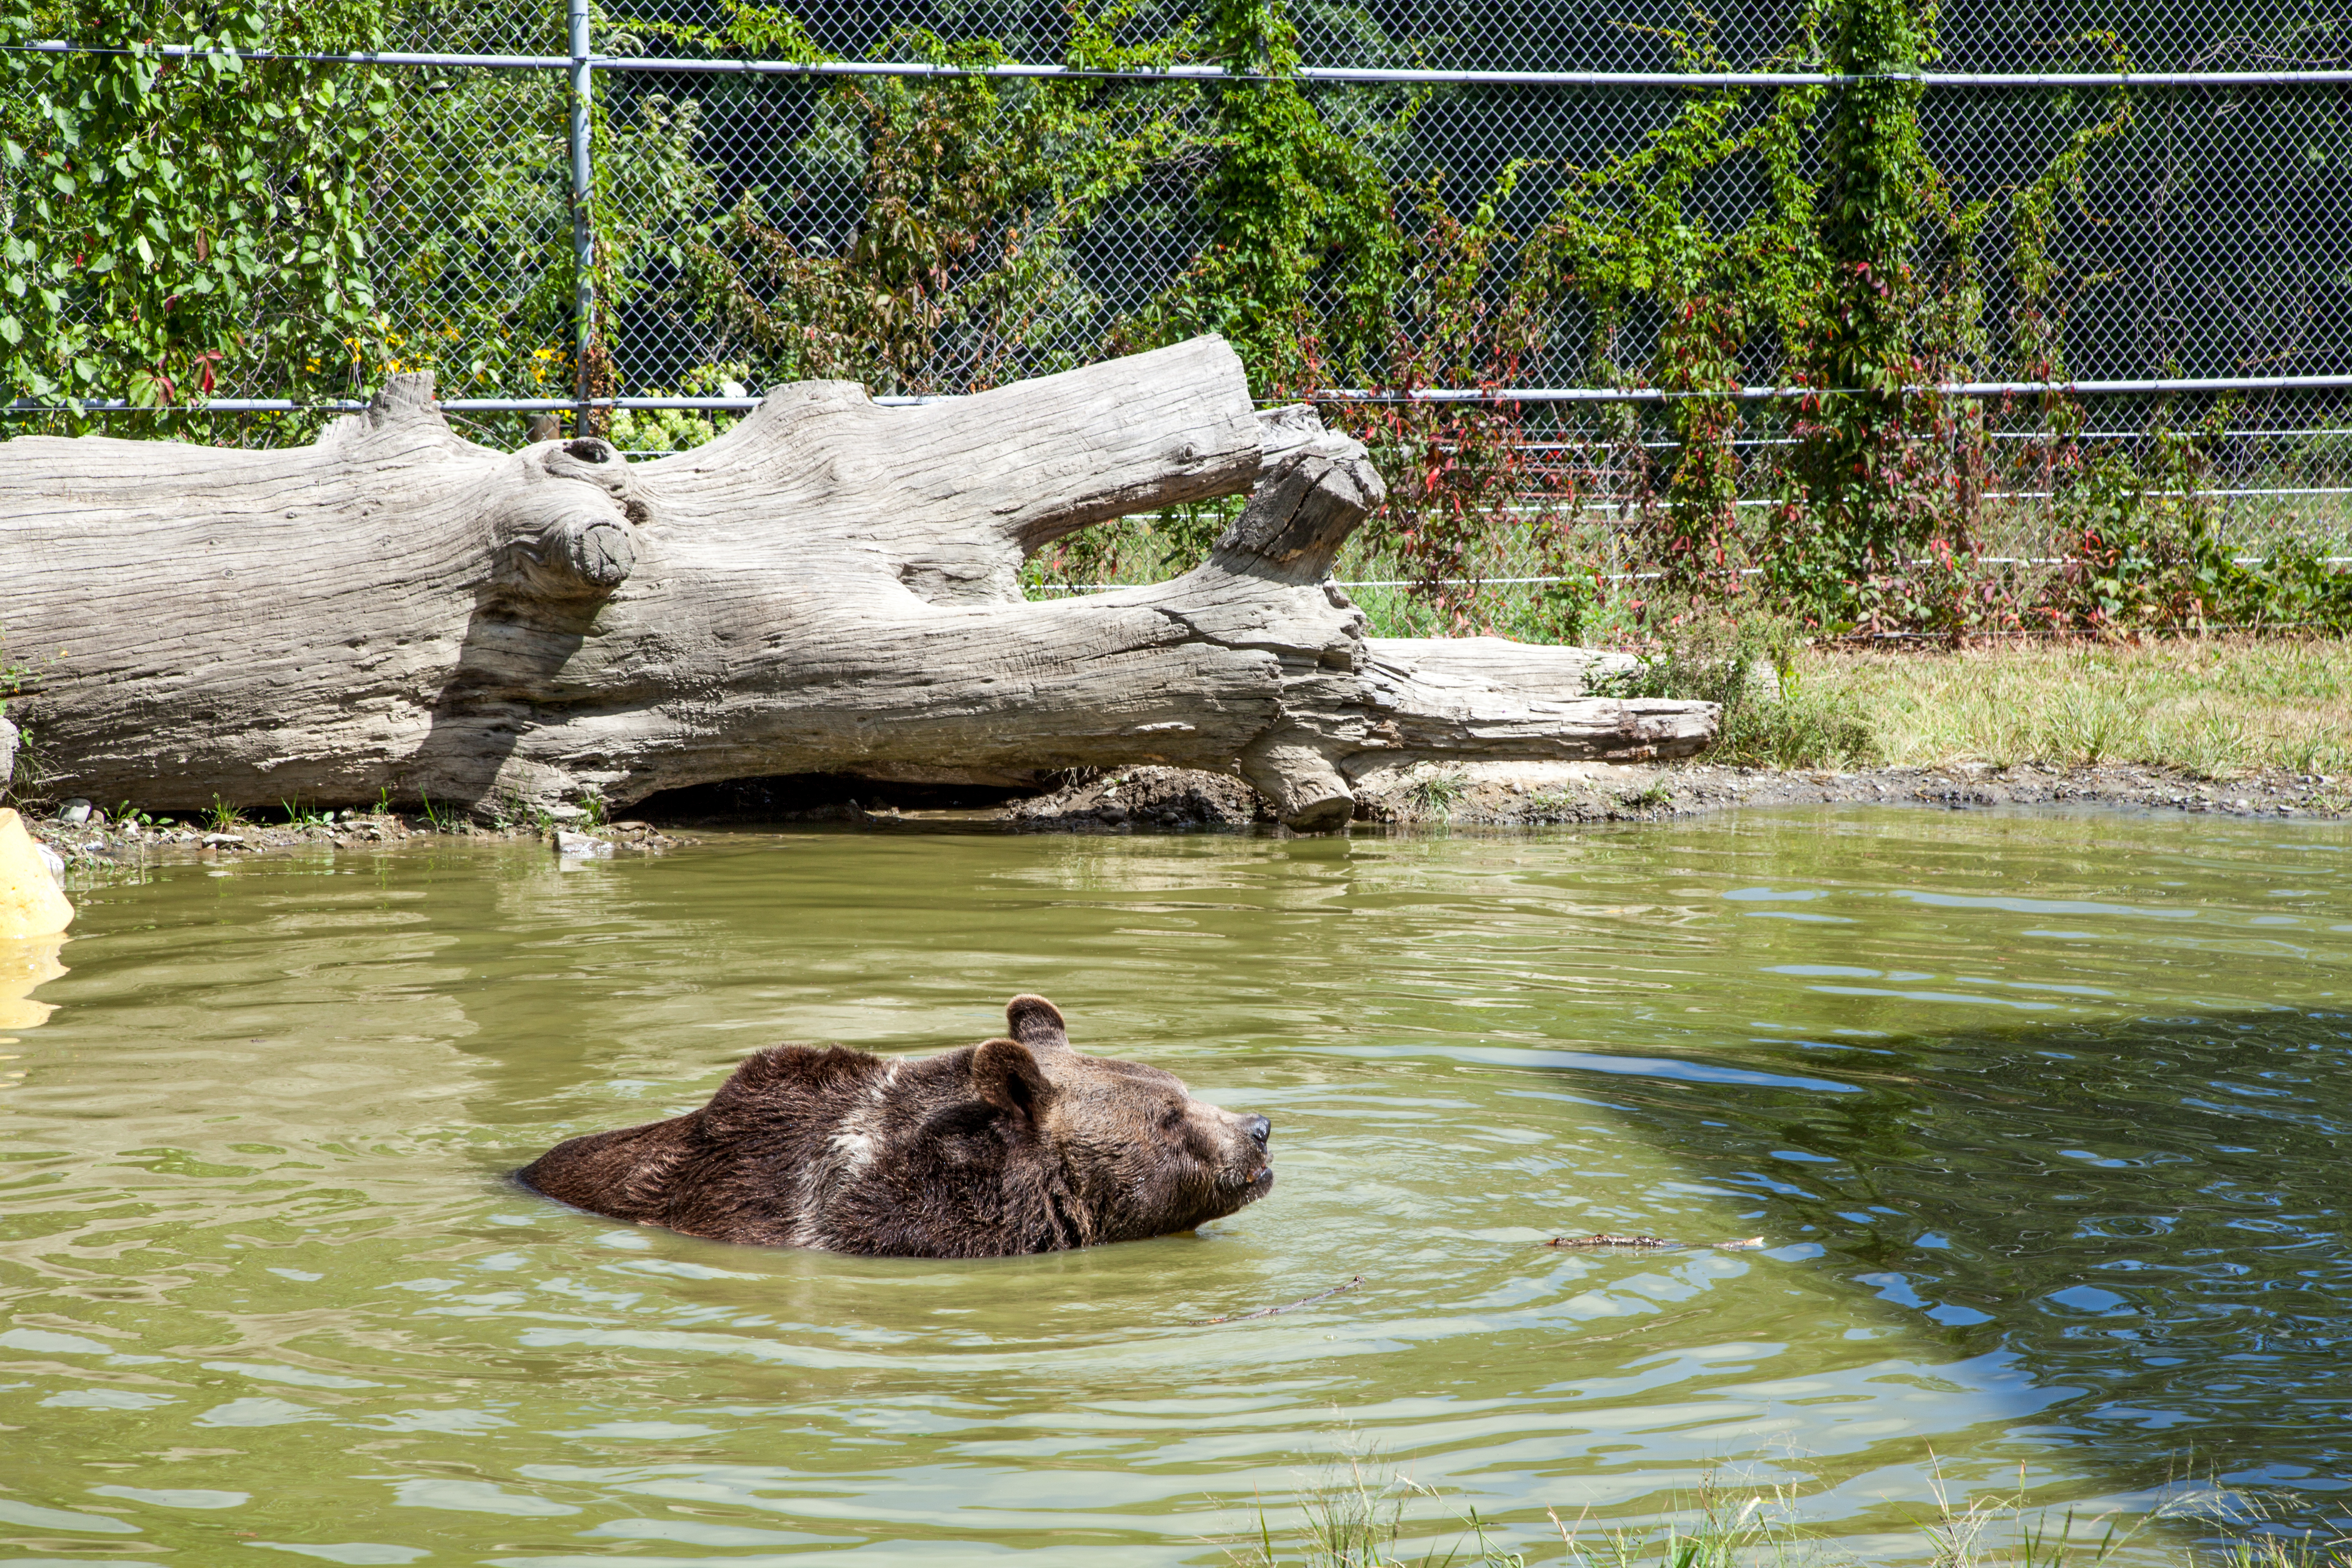 Leo, a 22-year-old Syrian bear, swimming in an enclosure at the Orphaned Wildlife Center in Otisville on Sept. 7, 2016. (James Smith)